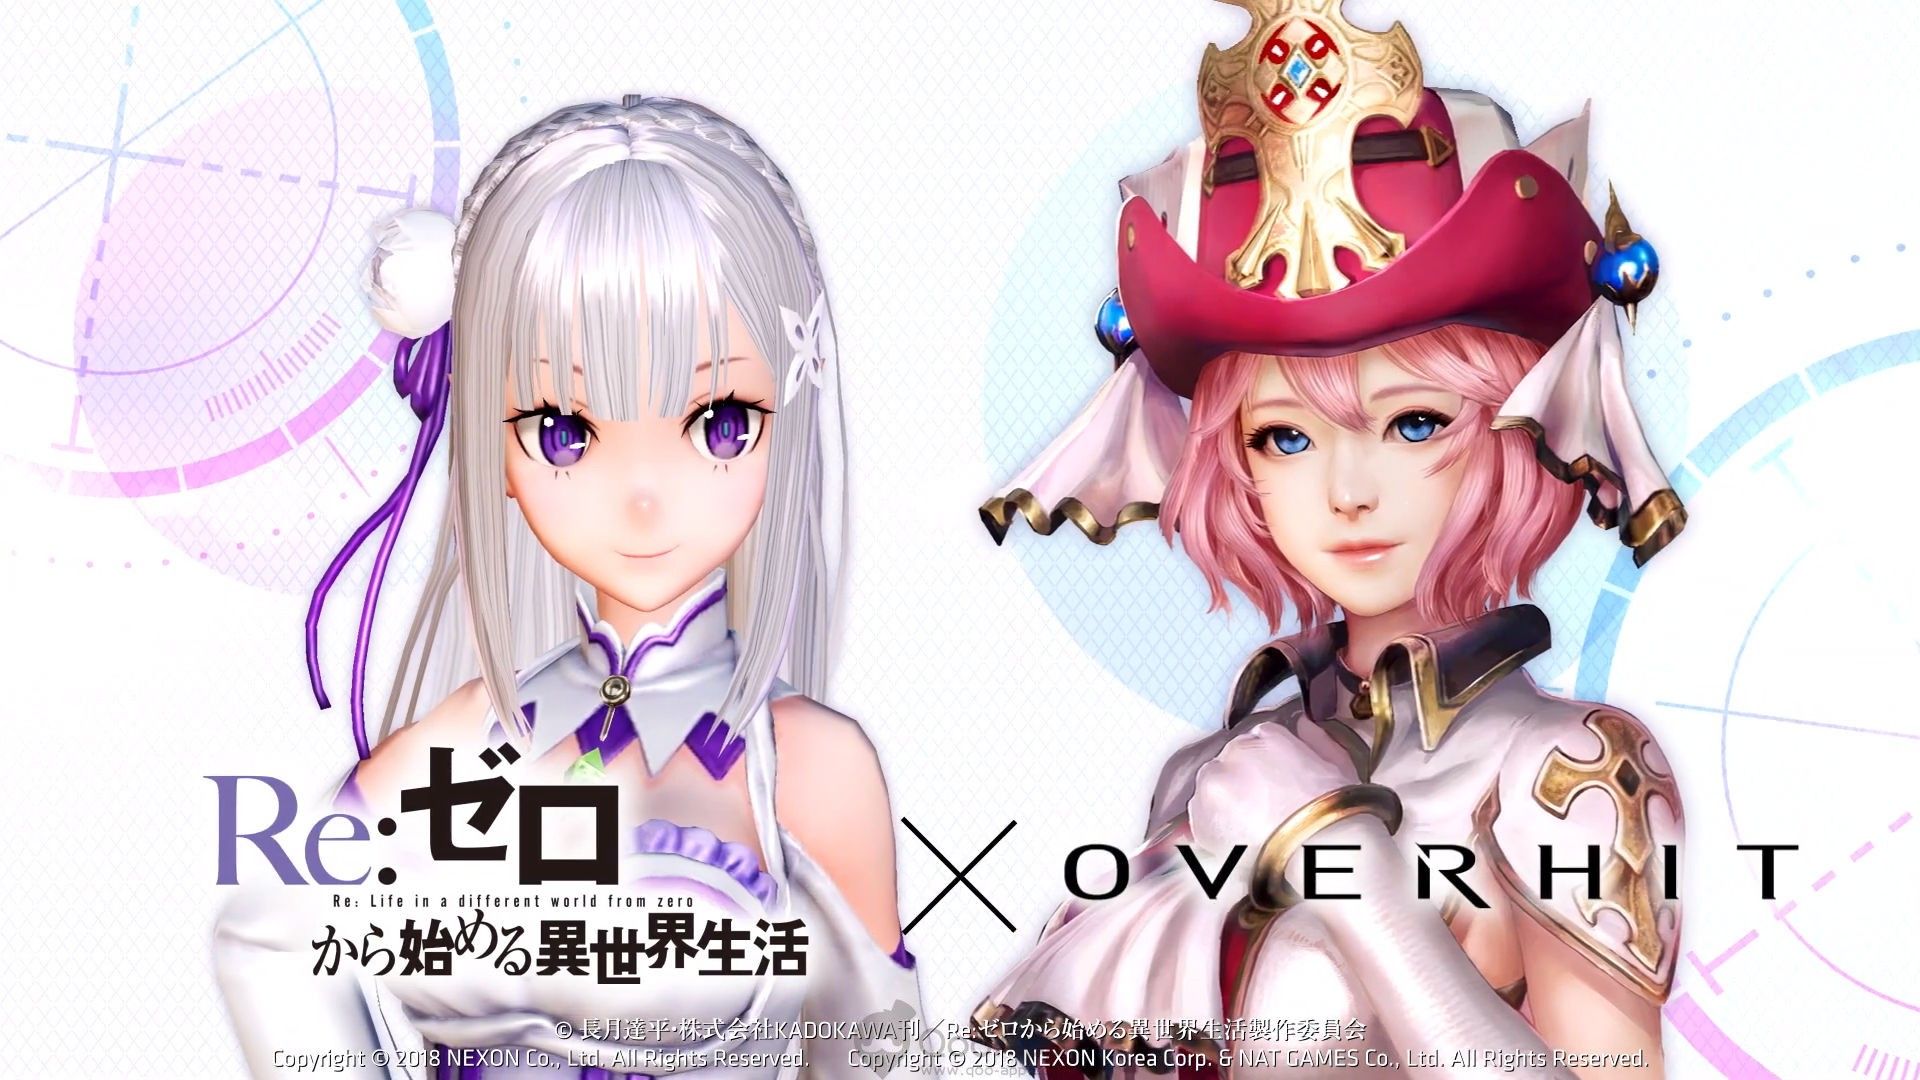 Qoo News OVERHIT X Re:Zero Collaboration Launches On 12 12